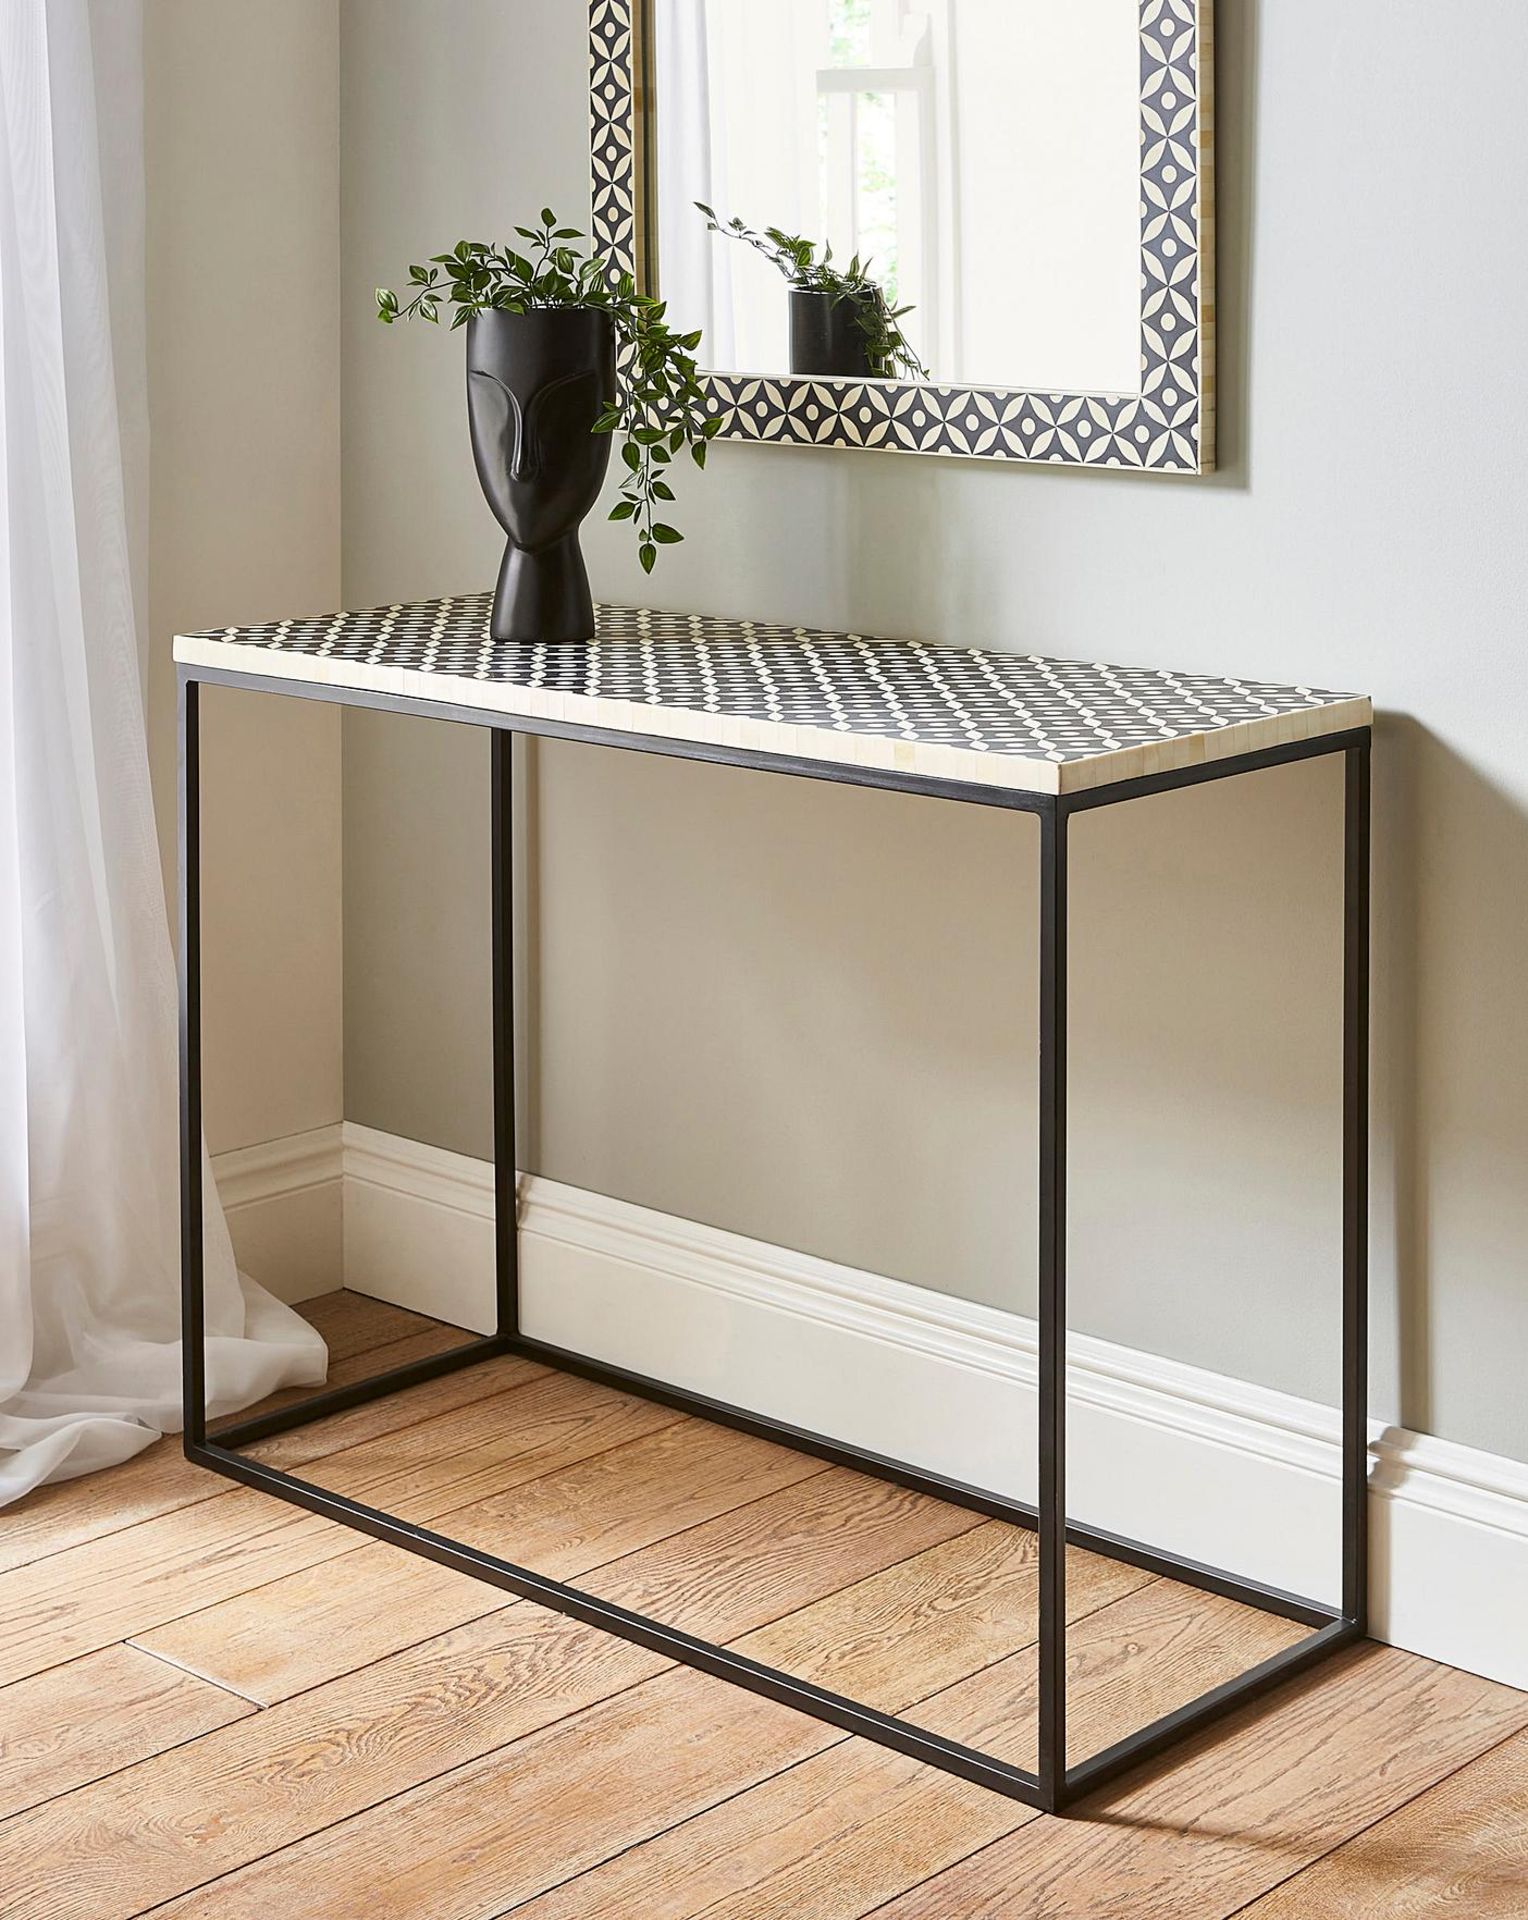 BRAND NEW AALIYAH LUXURY CONSOLE TABLE R11-14